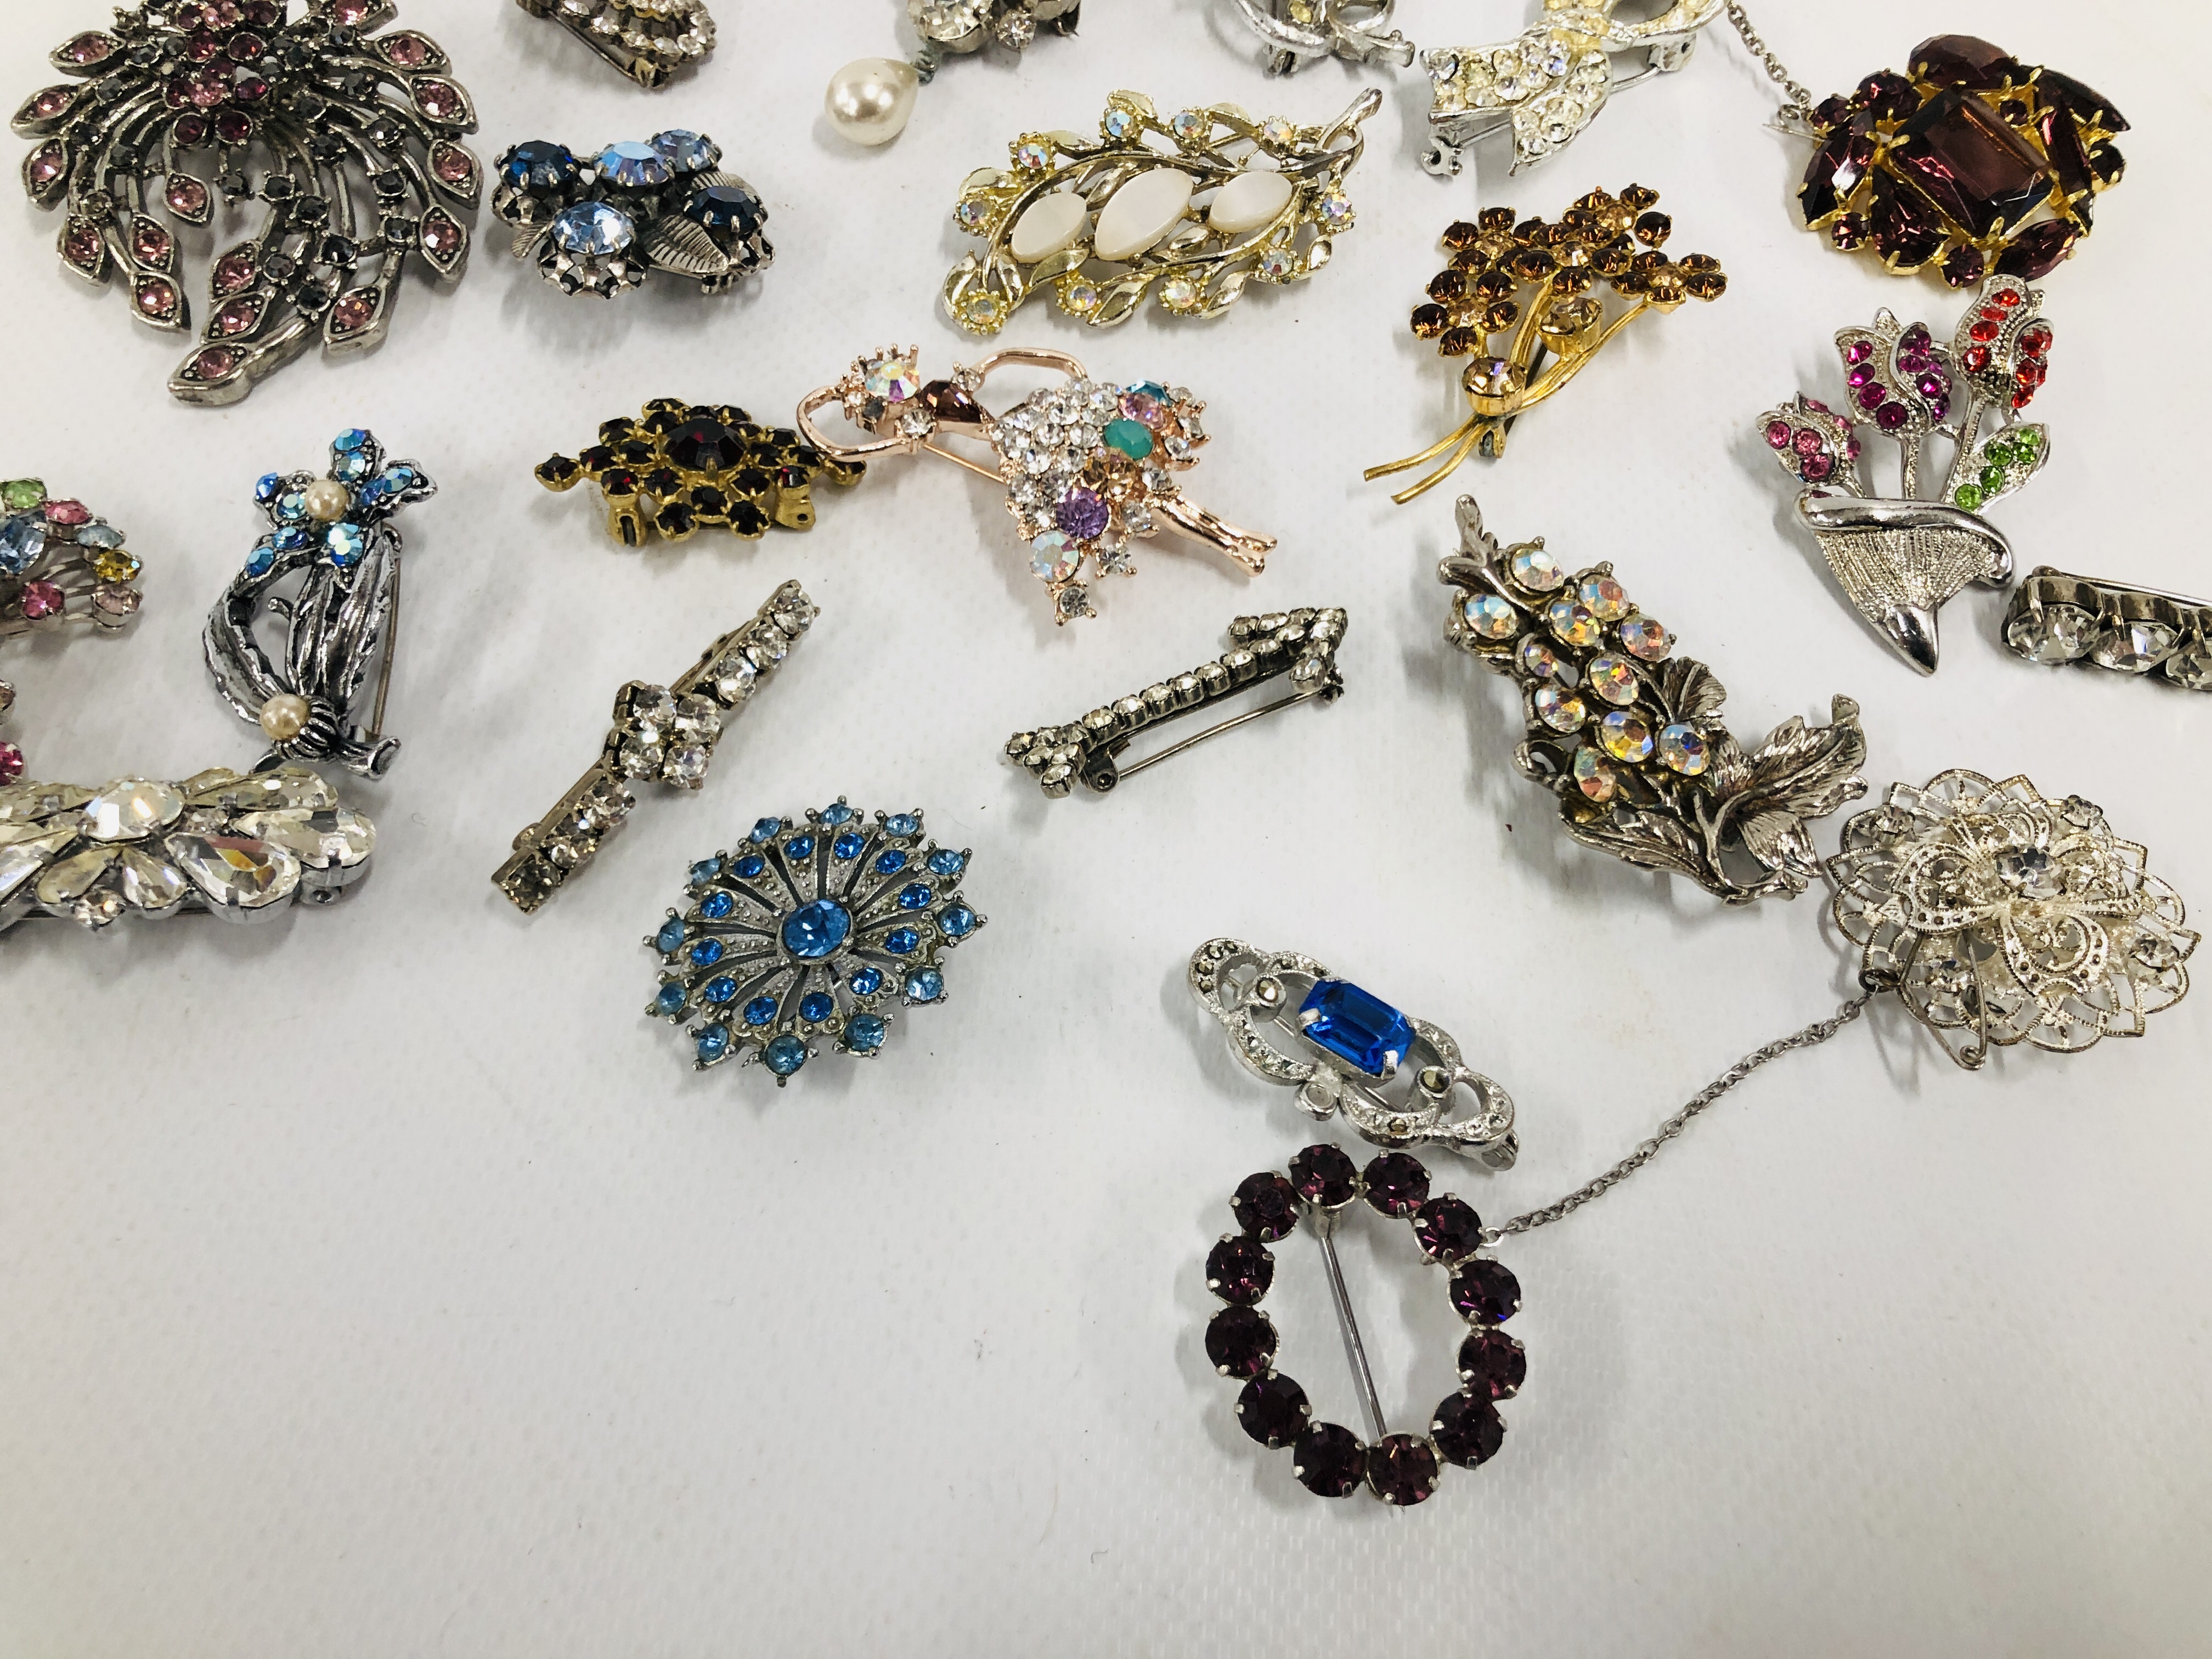 COLLECTION OF 23 VINTAGE AND RETRO SILVER AND GOLD TONE BROOCHES. - Image 6 of 6